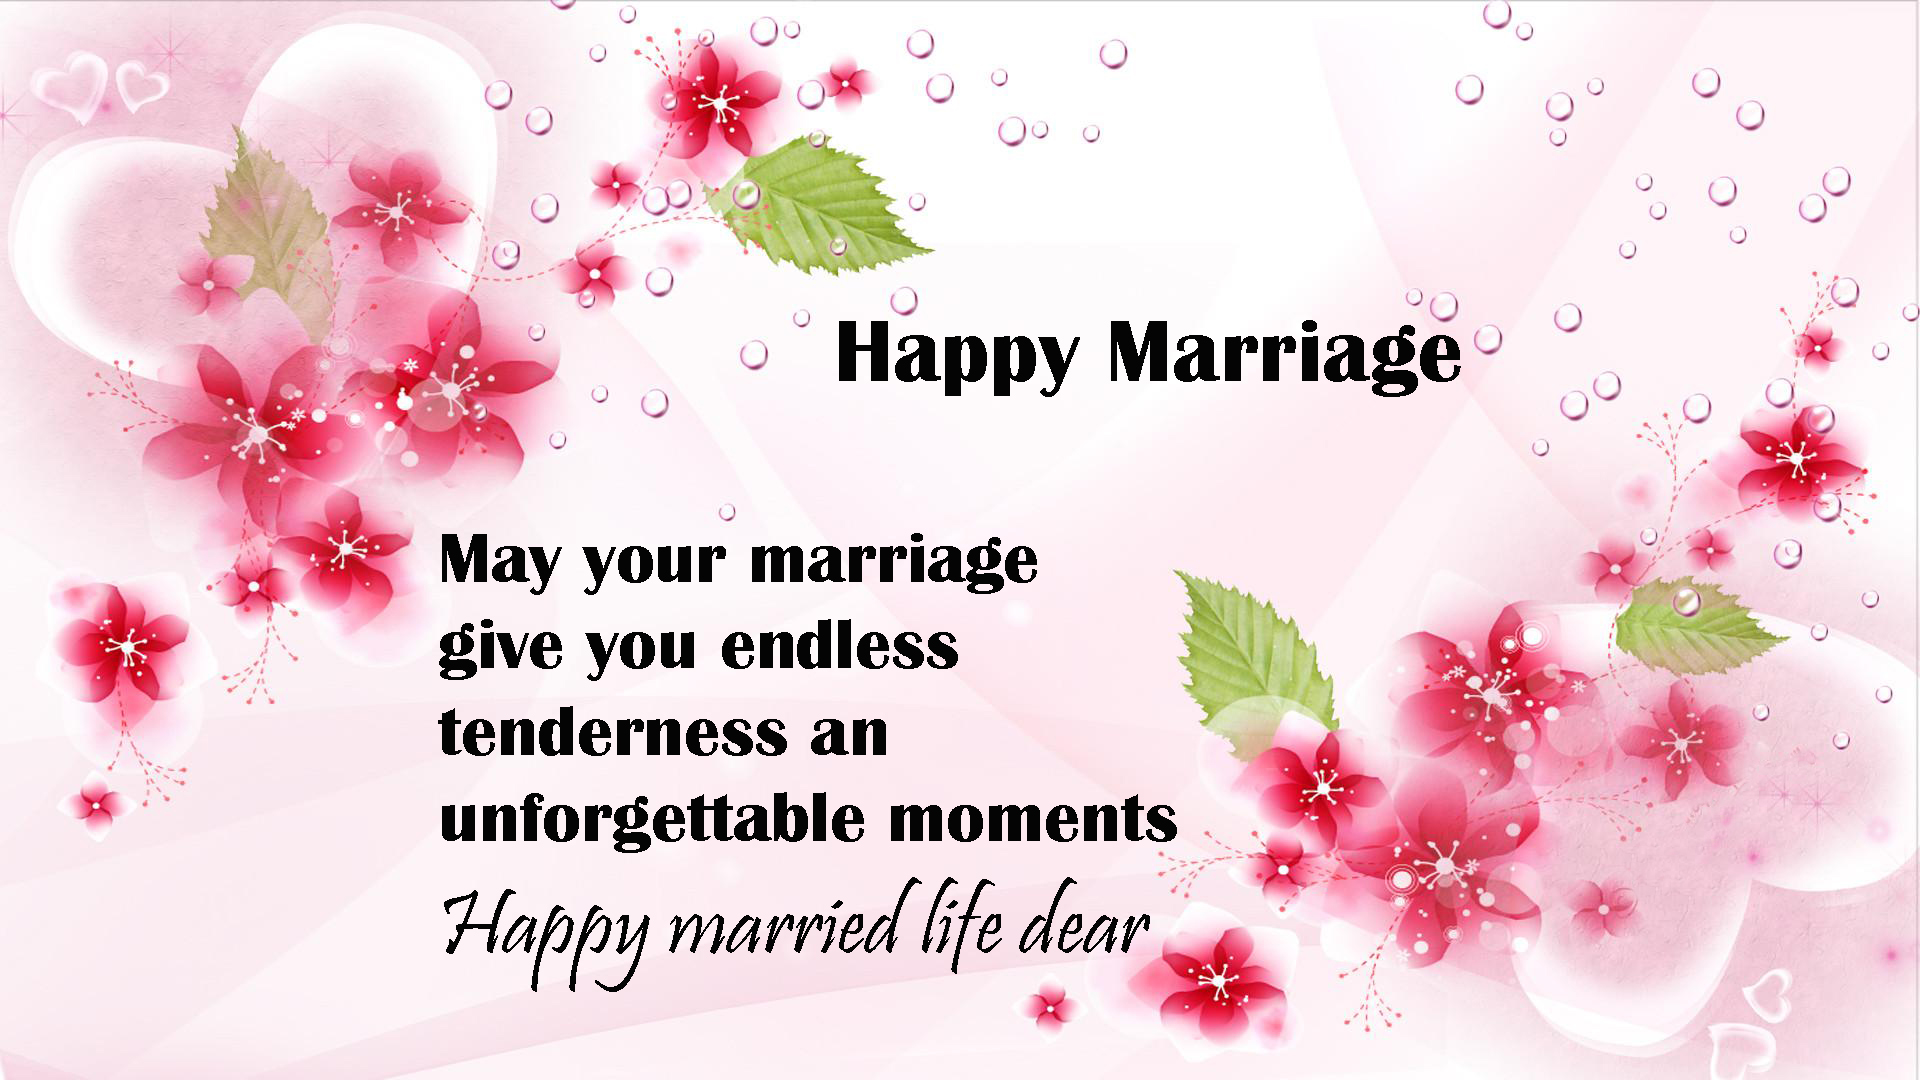 Wedding Wishes In Tamil